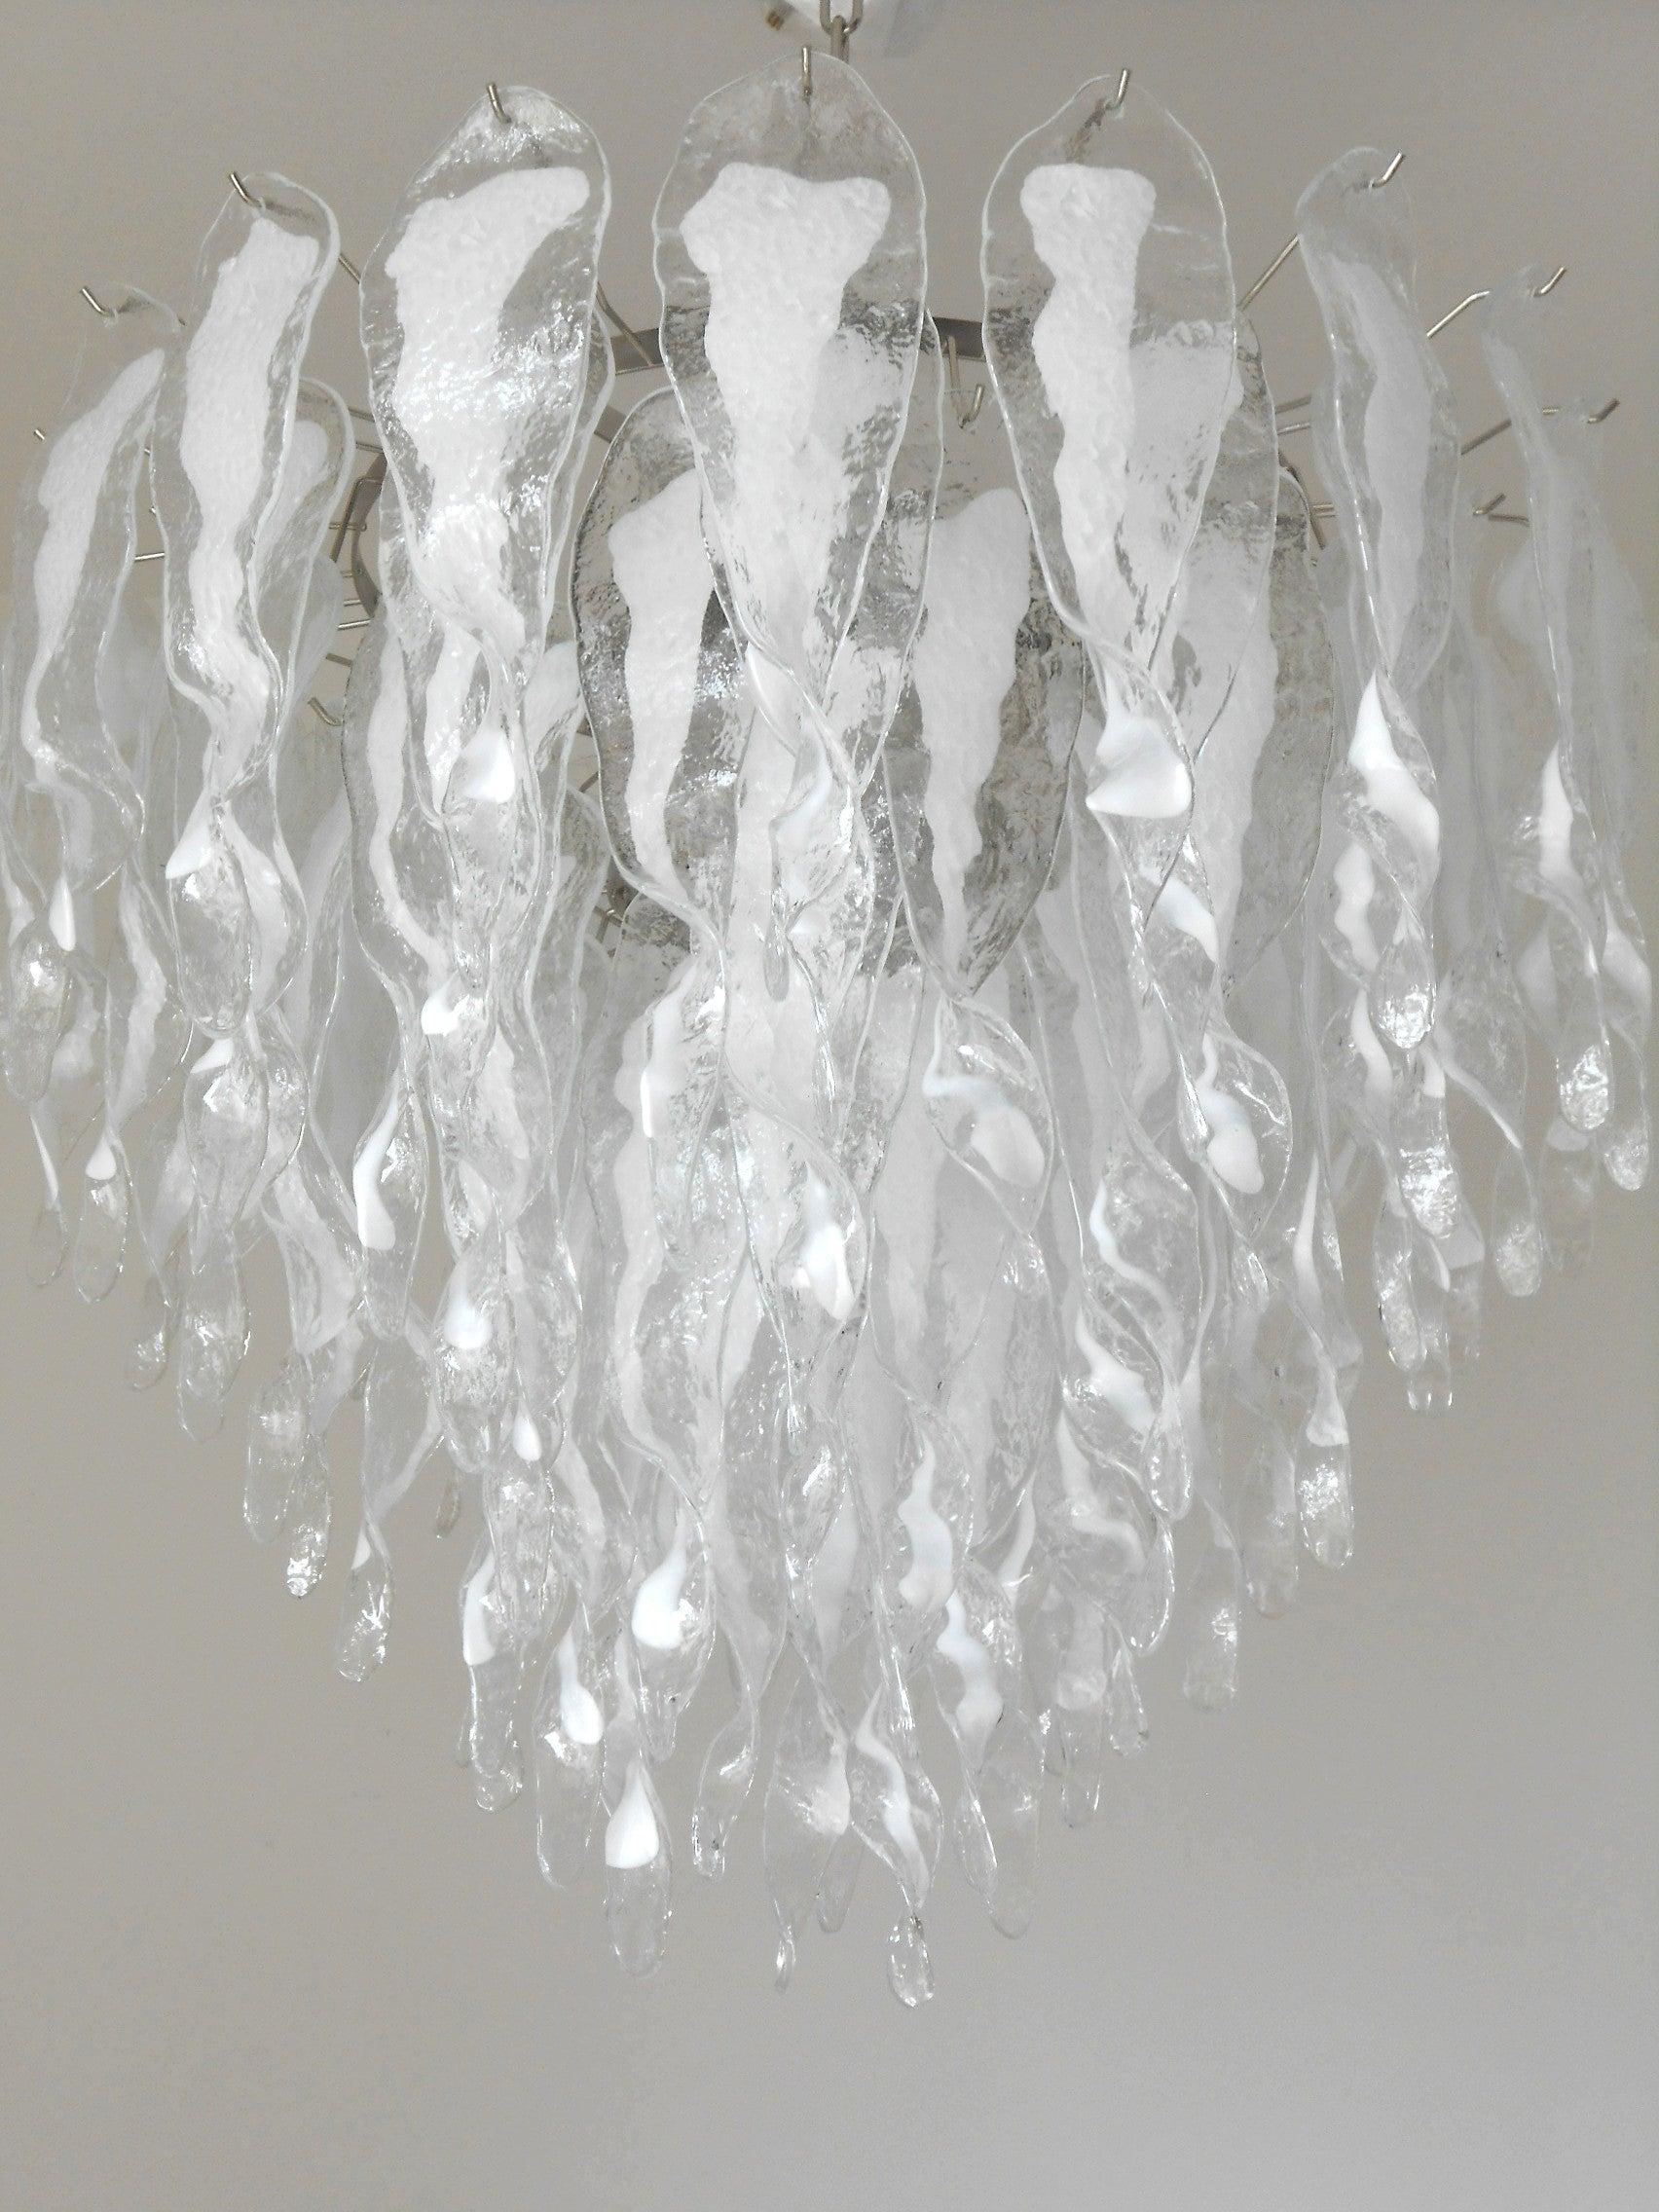 Italian chandelier shown with milky white and clear Murano glasses hand blown to form beautiful dangling stalactite shaped glasses, mounted on chrome finish frame / Designed by Fabio Bergomi for Fabio Ltd, inspired by Mazzega / Made in Italy
13